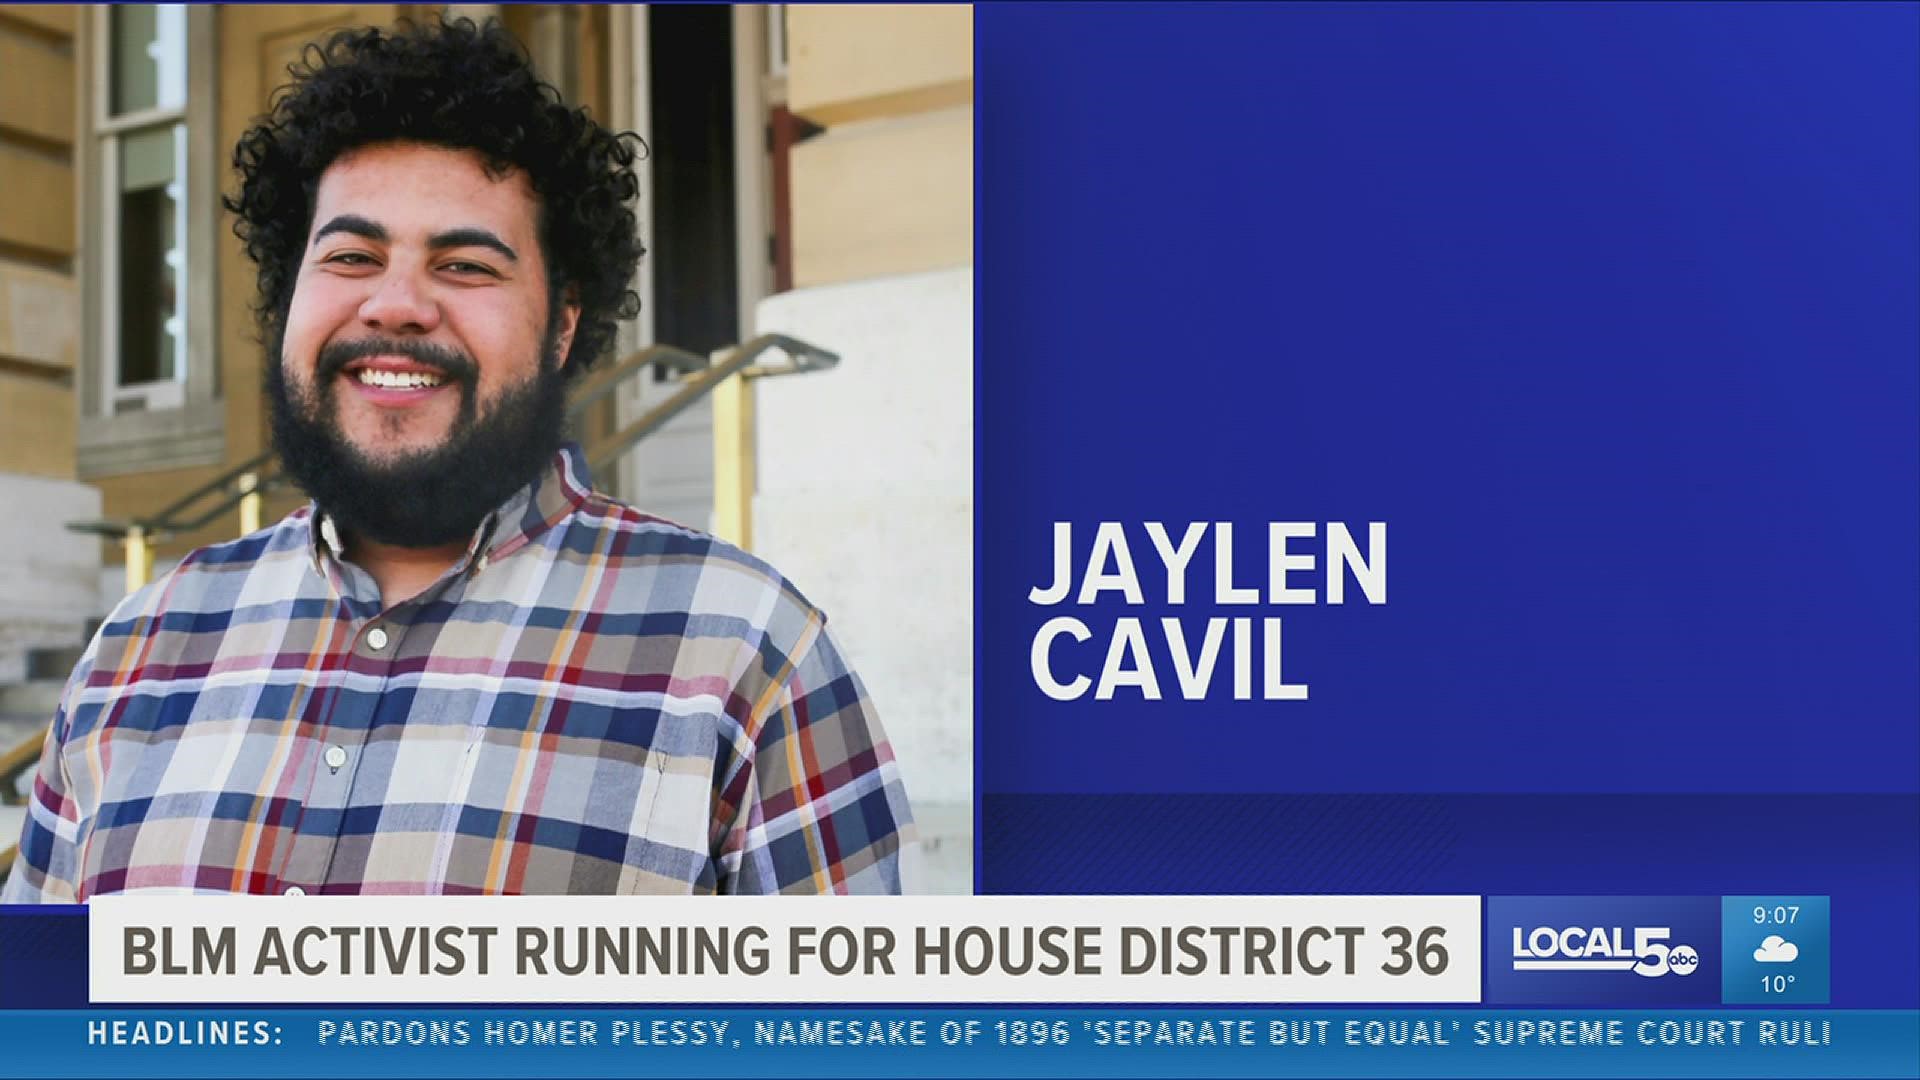 Jaylen Cavil will run in House District 36, which covers the west side of Des Moines.